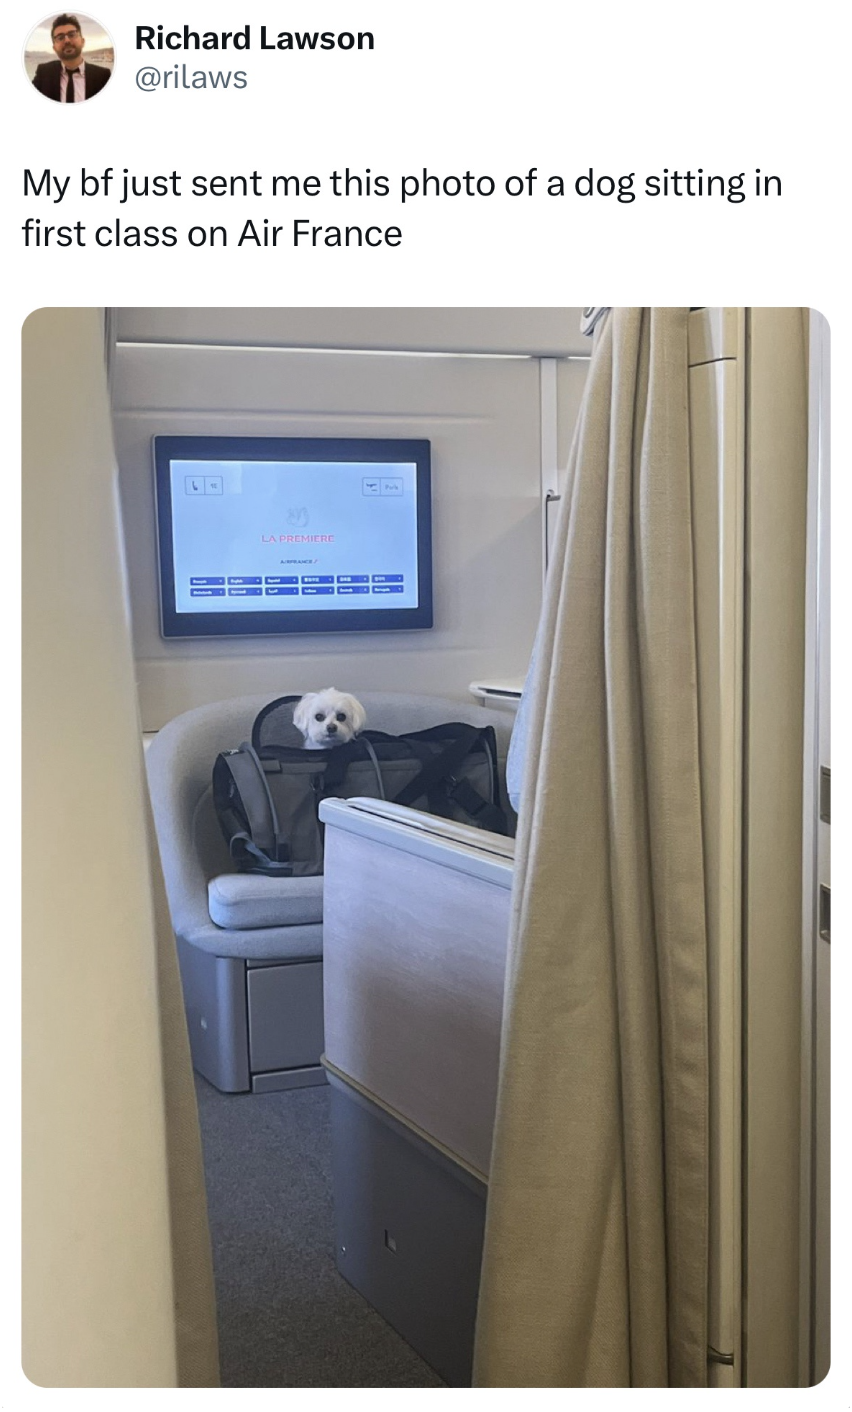 display device - Richard Lawson My bf just sent me this photo of a dog sitting in first class on Air France